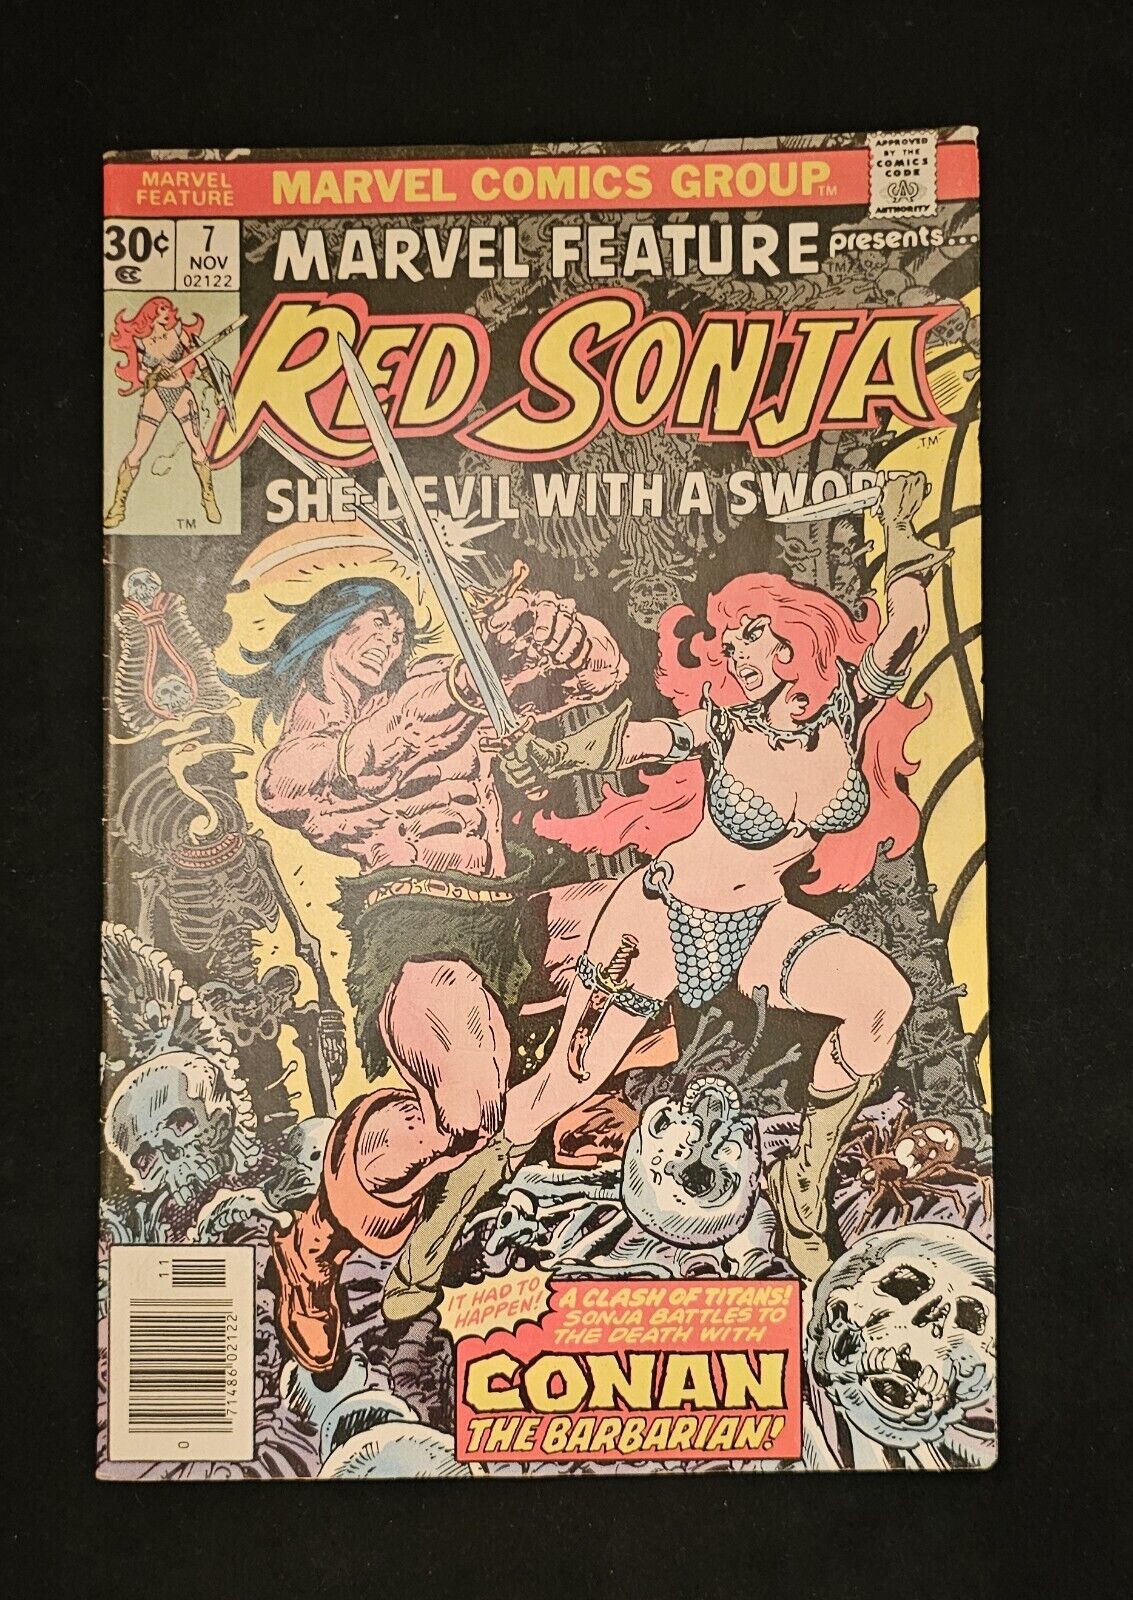 MARVEL FEATURE Presents RED SONJA #7 in VF+ a 1976 Marvel comic with CONAN